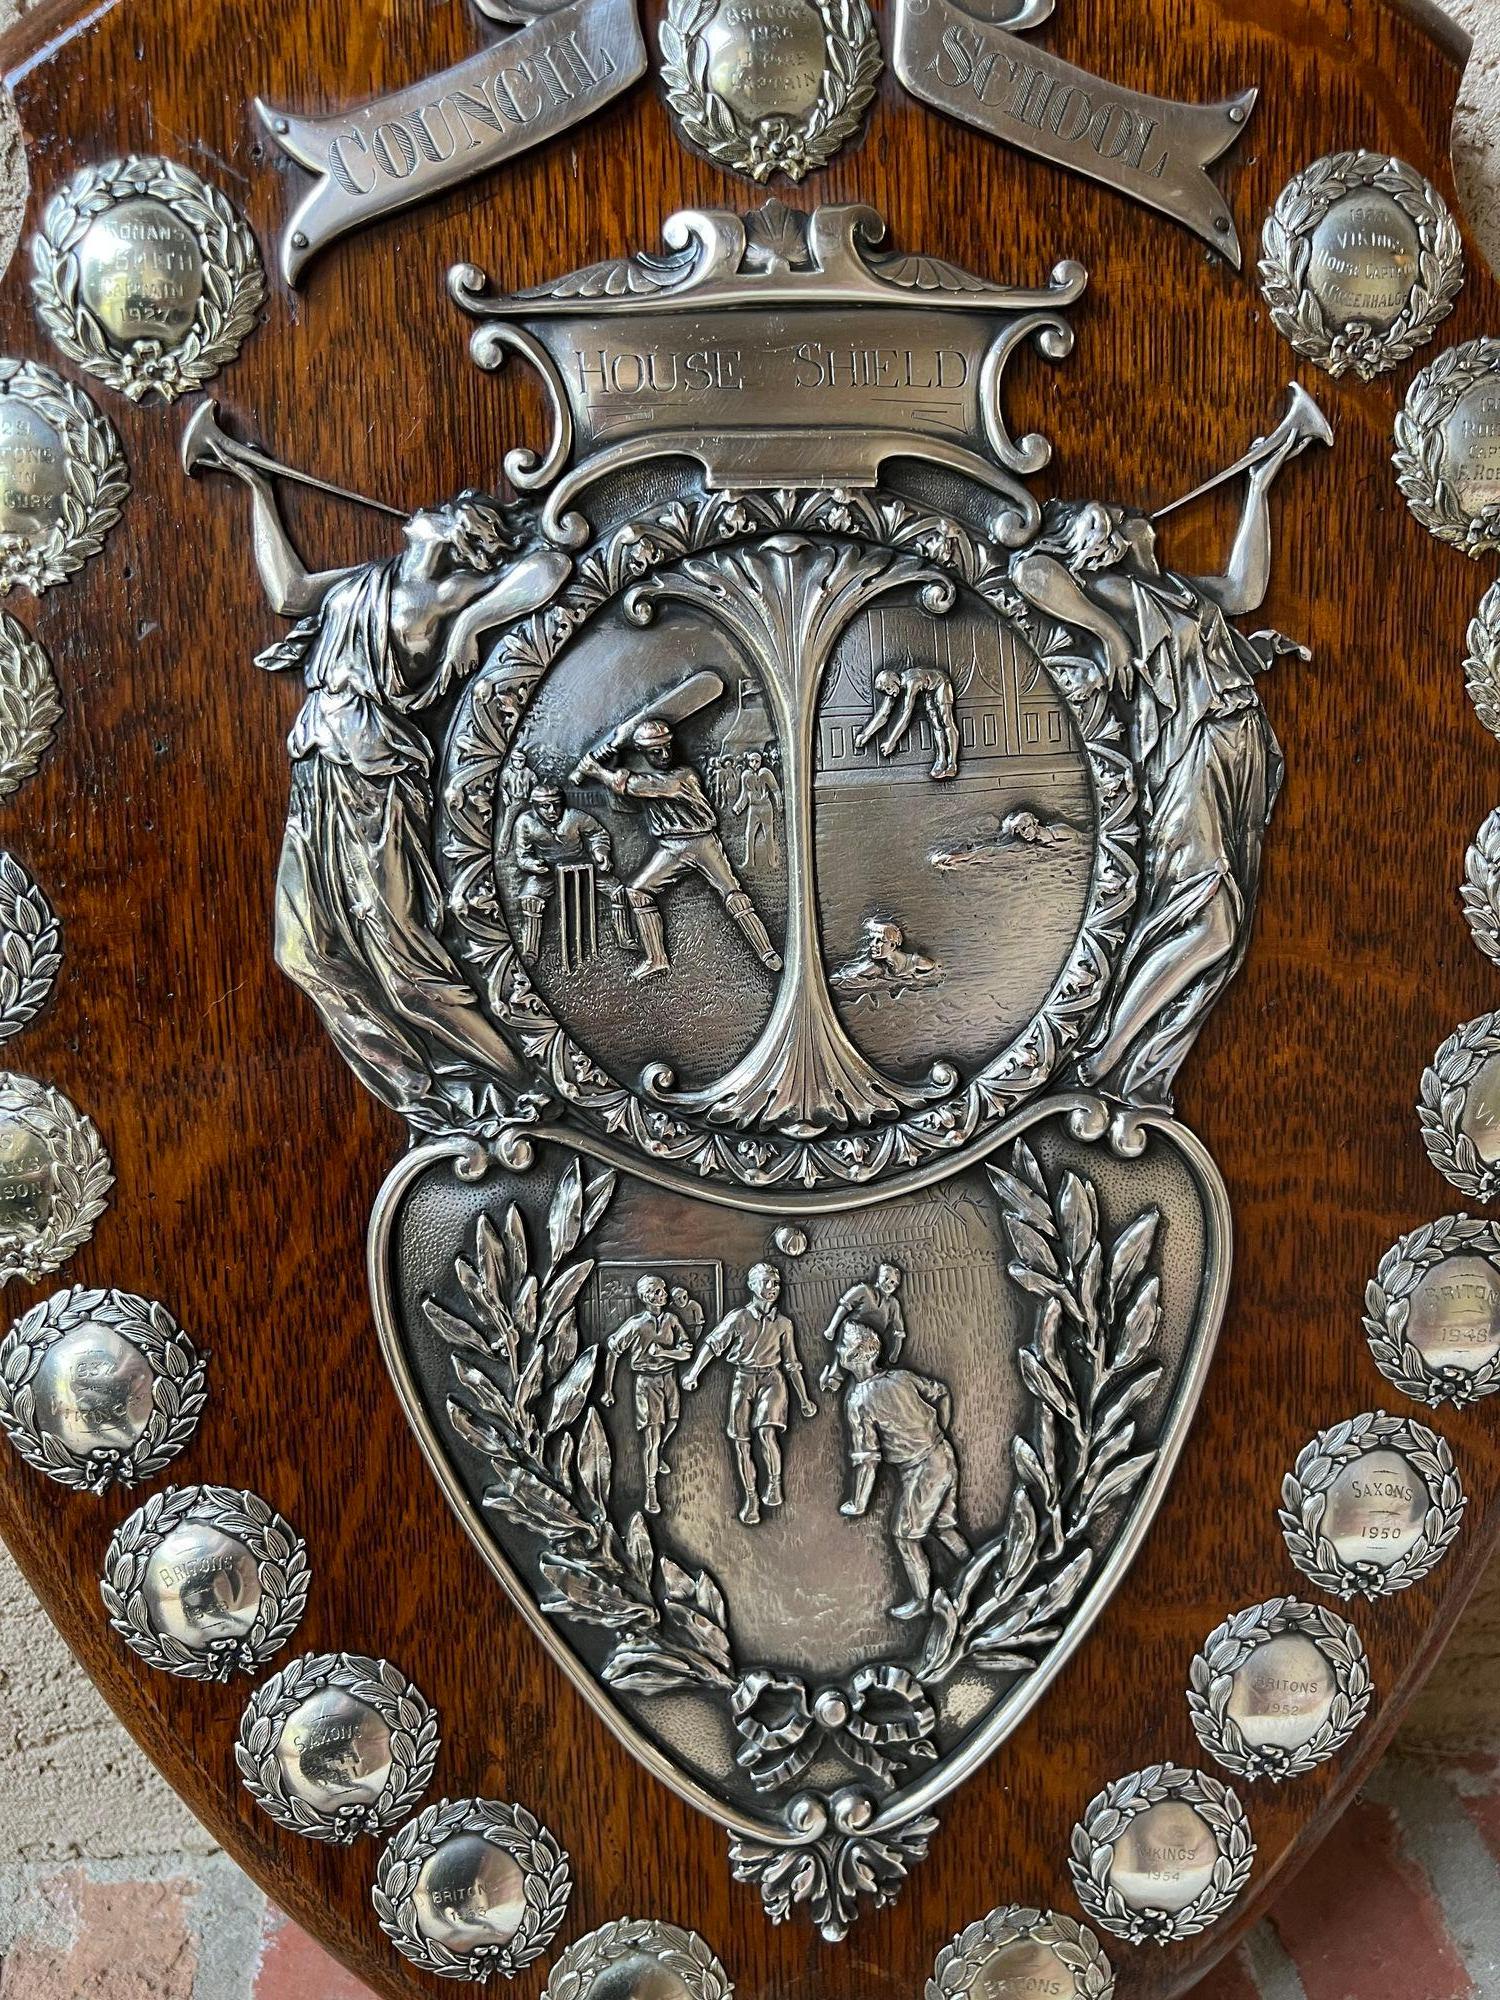 British Antique English Trophy Baseball Soccer Swimming Award Plaque Repousse c1926 For Sale